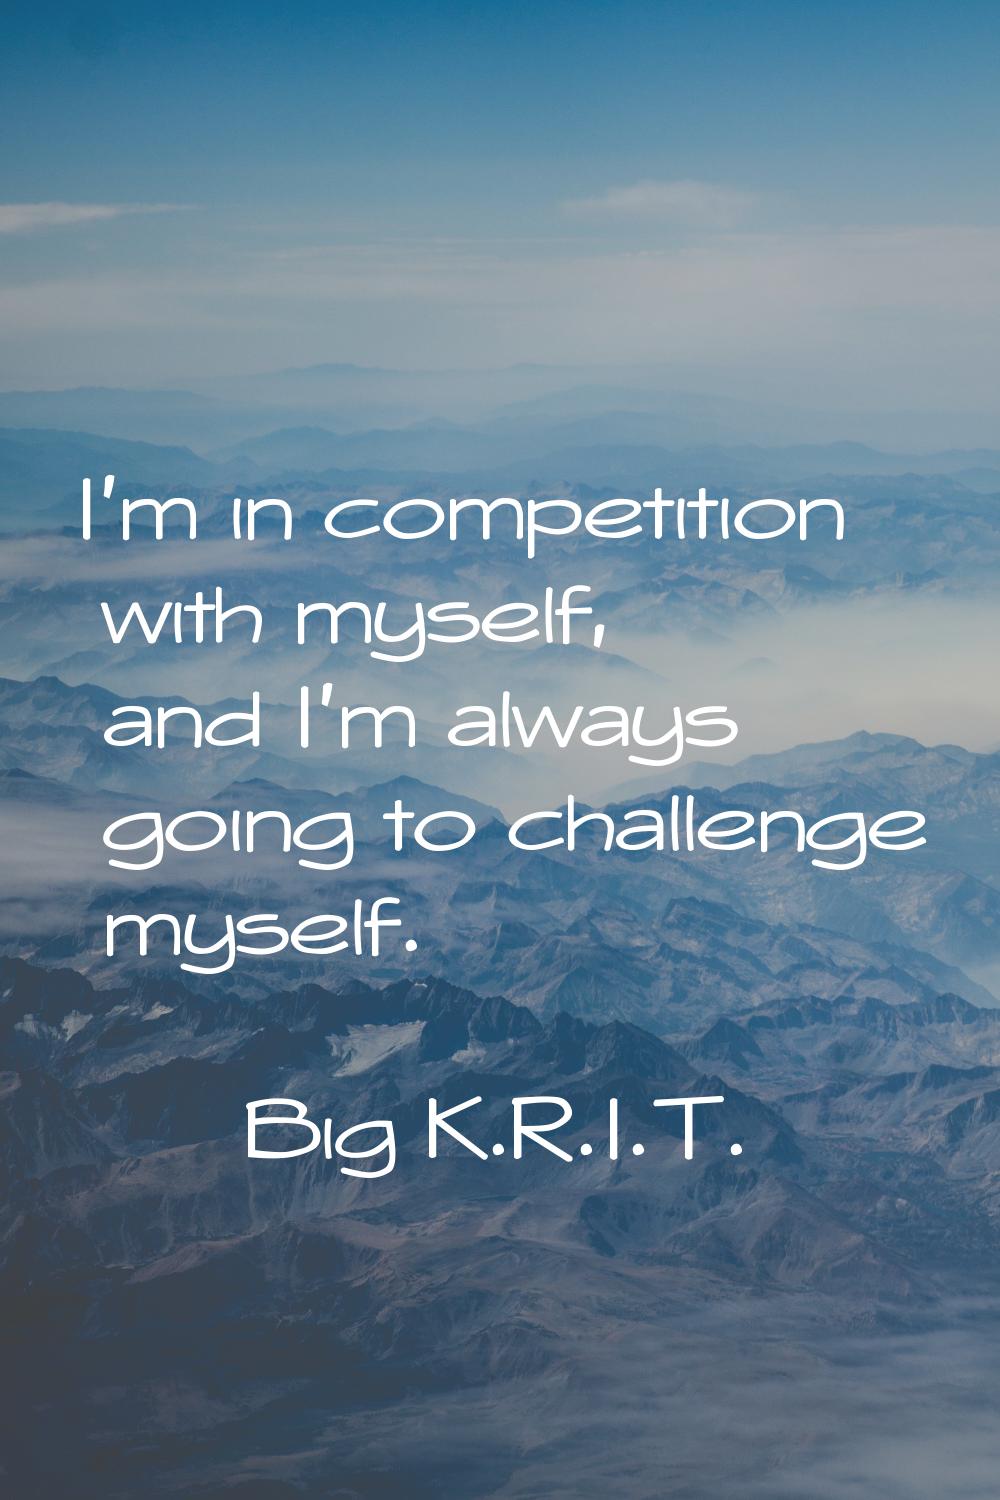 I'm in competition with myself, and I'm always going to challenge myself.